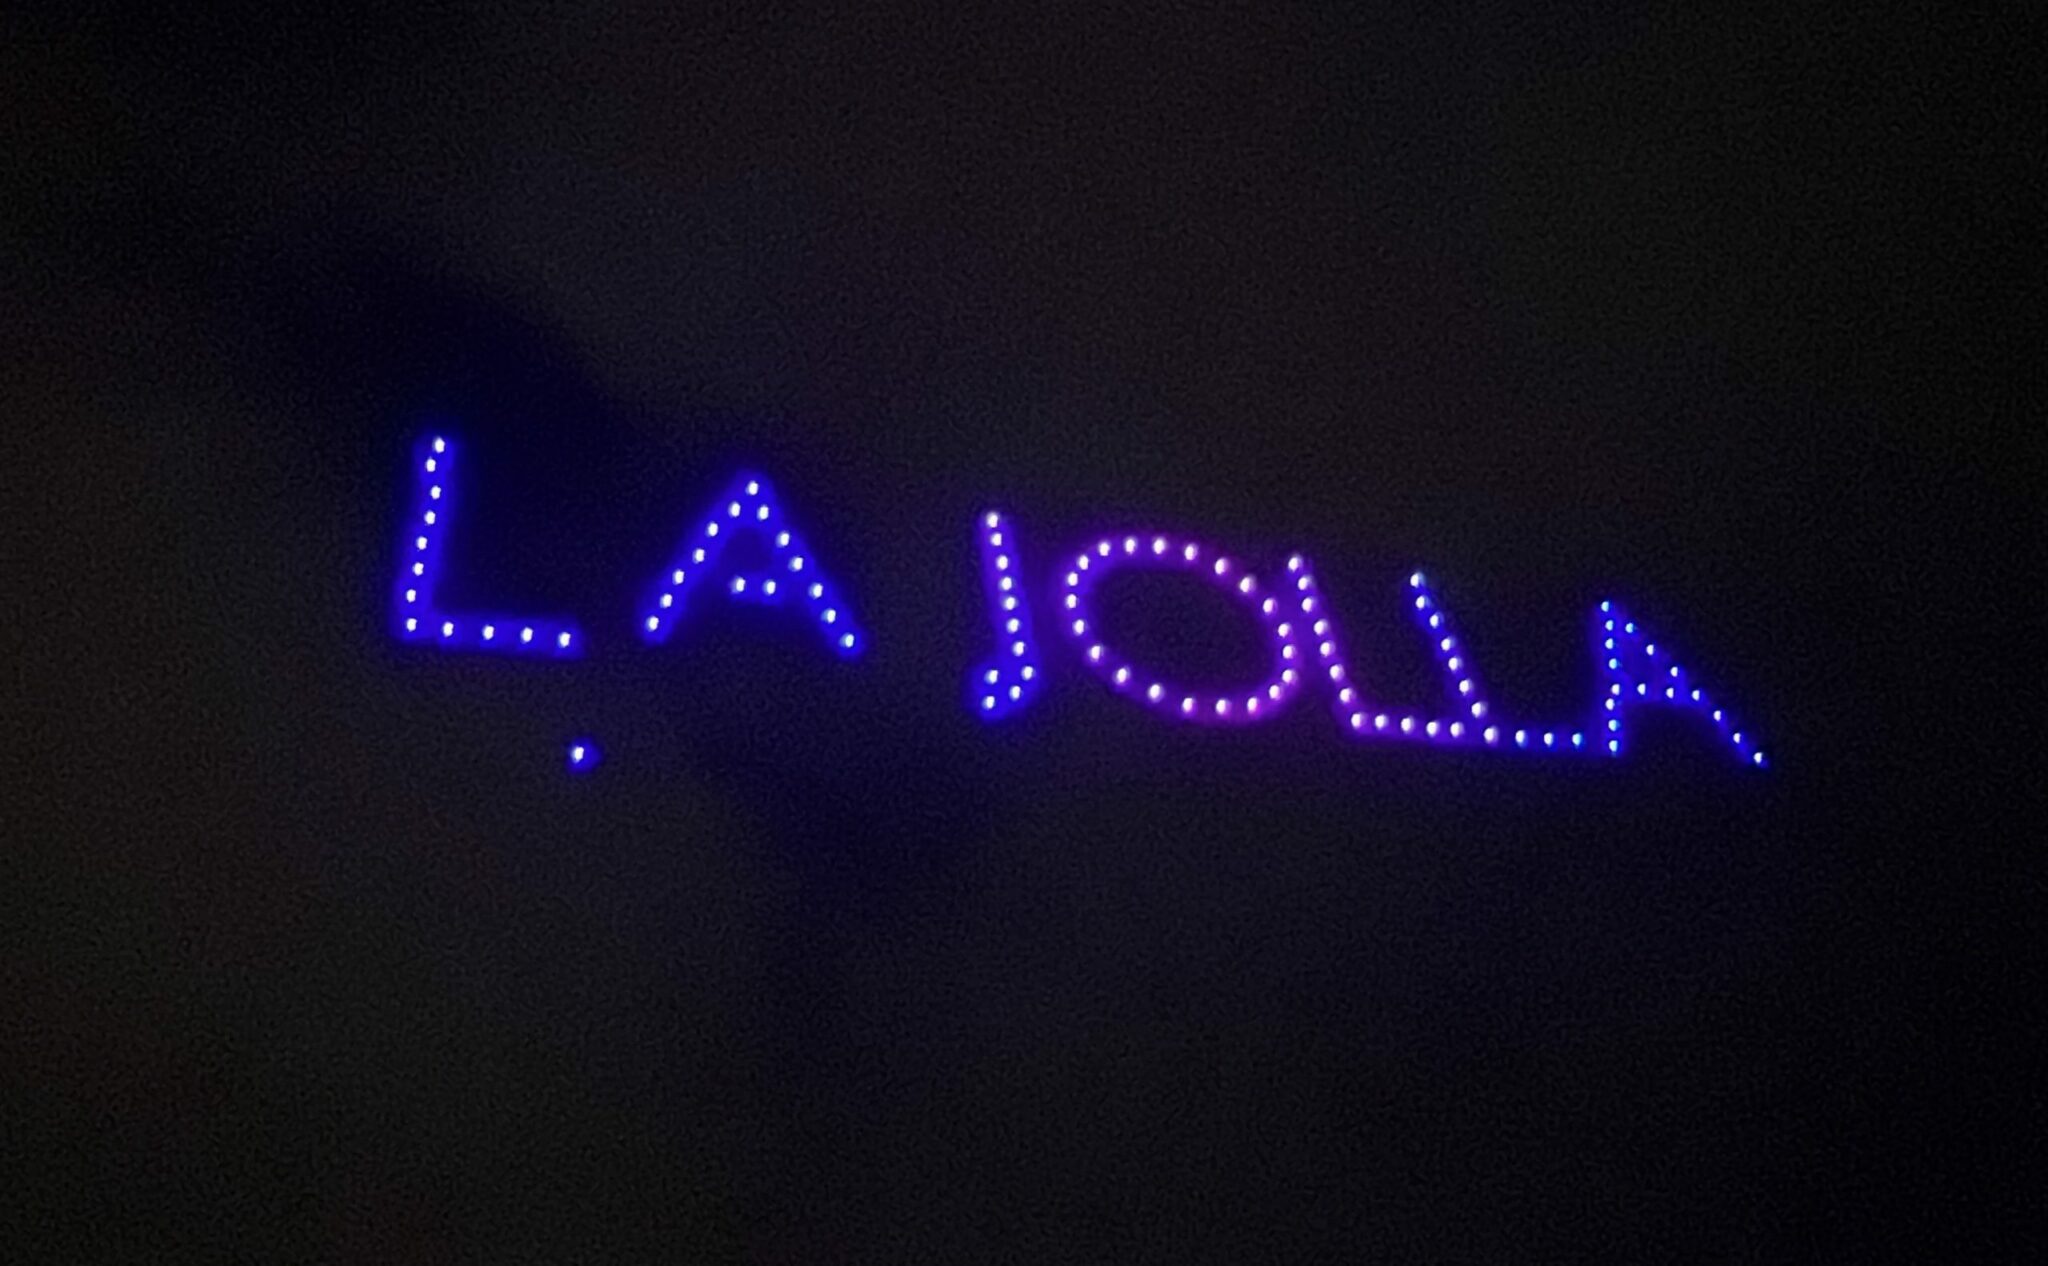 The July 4 drone show lights up the sky with "La Jolla' spelled out in the sky with purple and pink lights